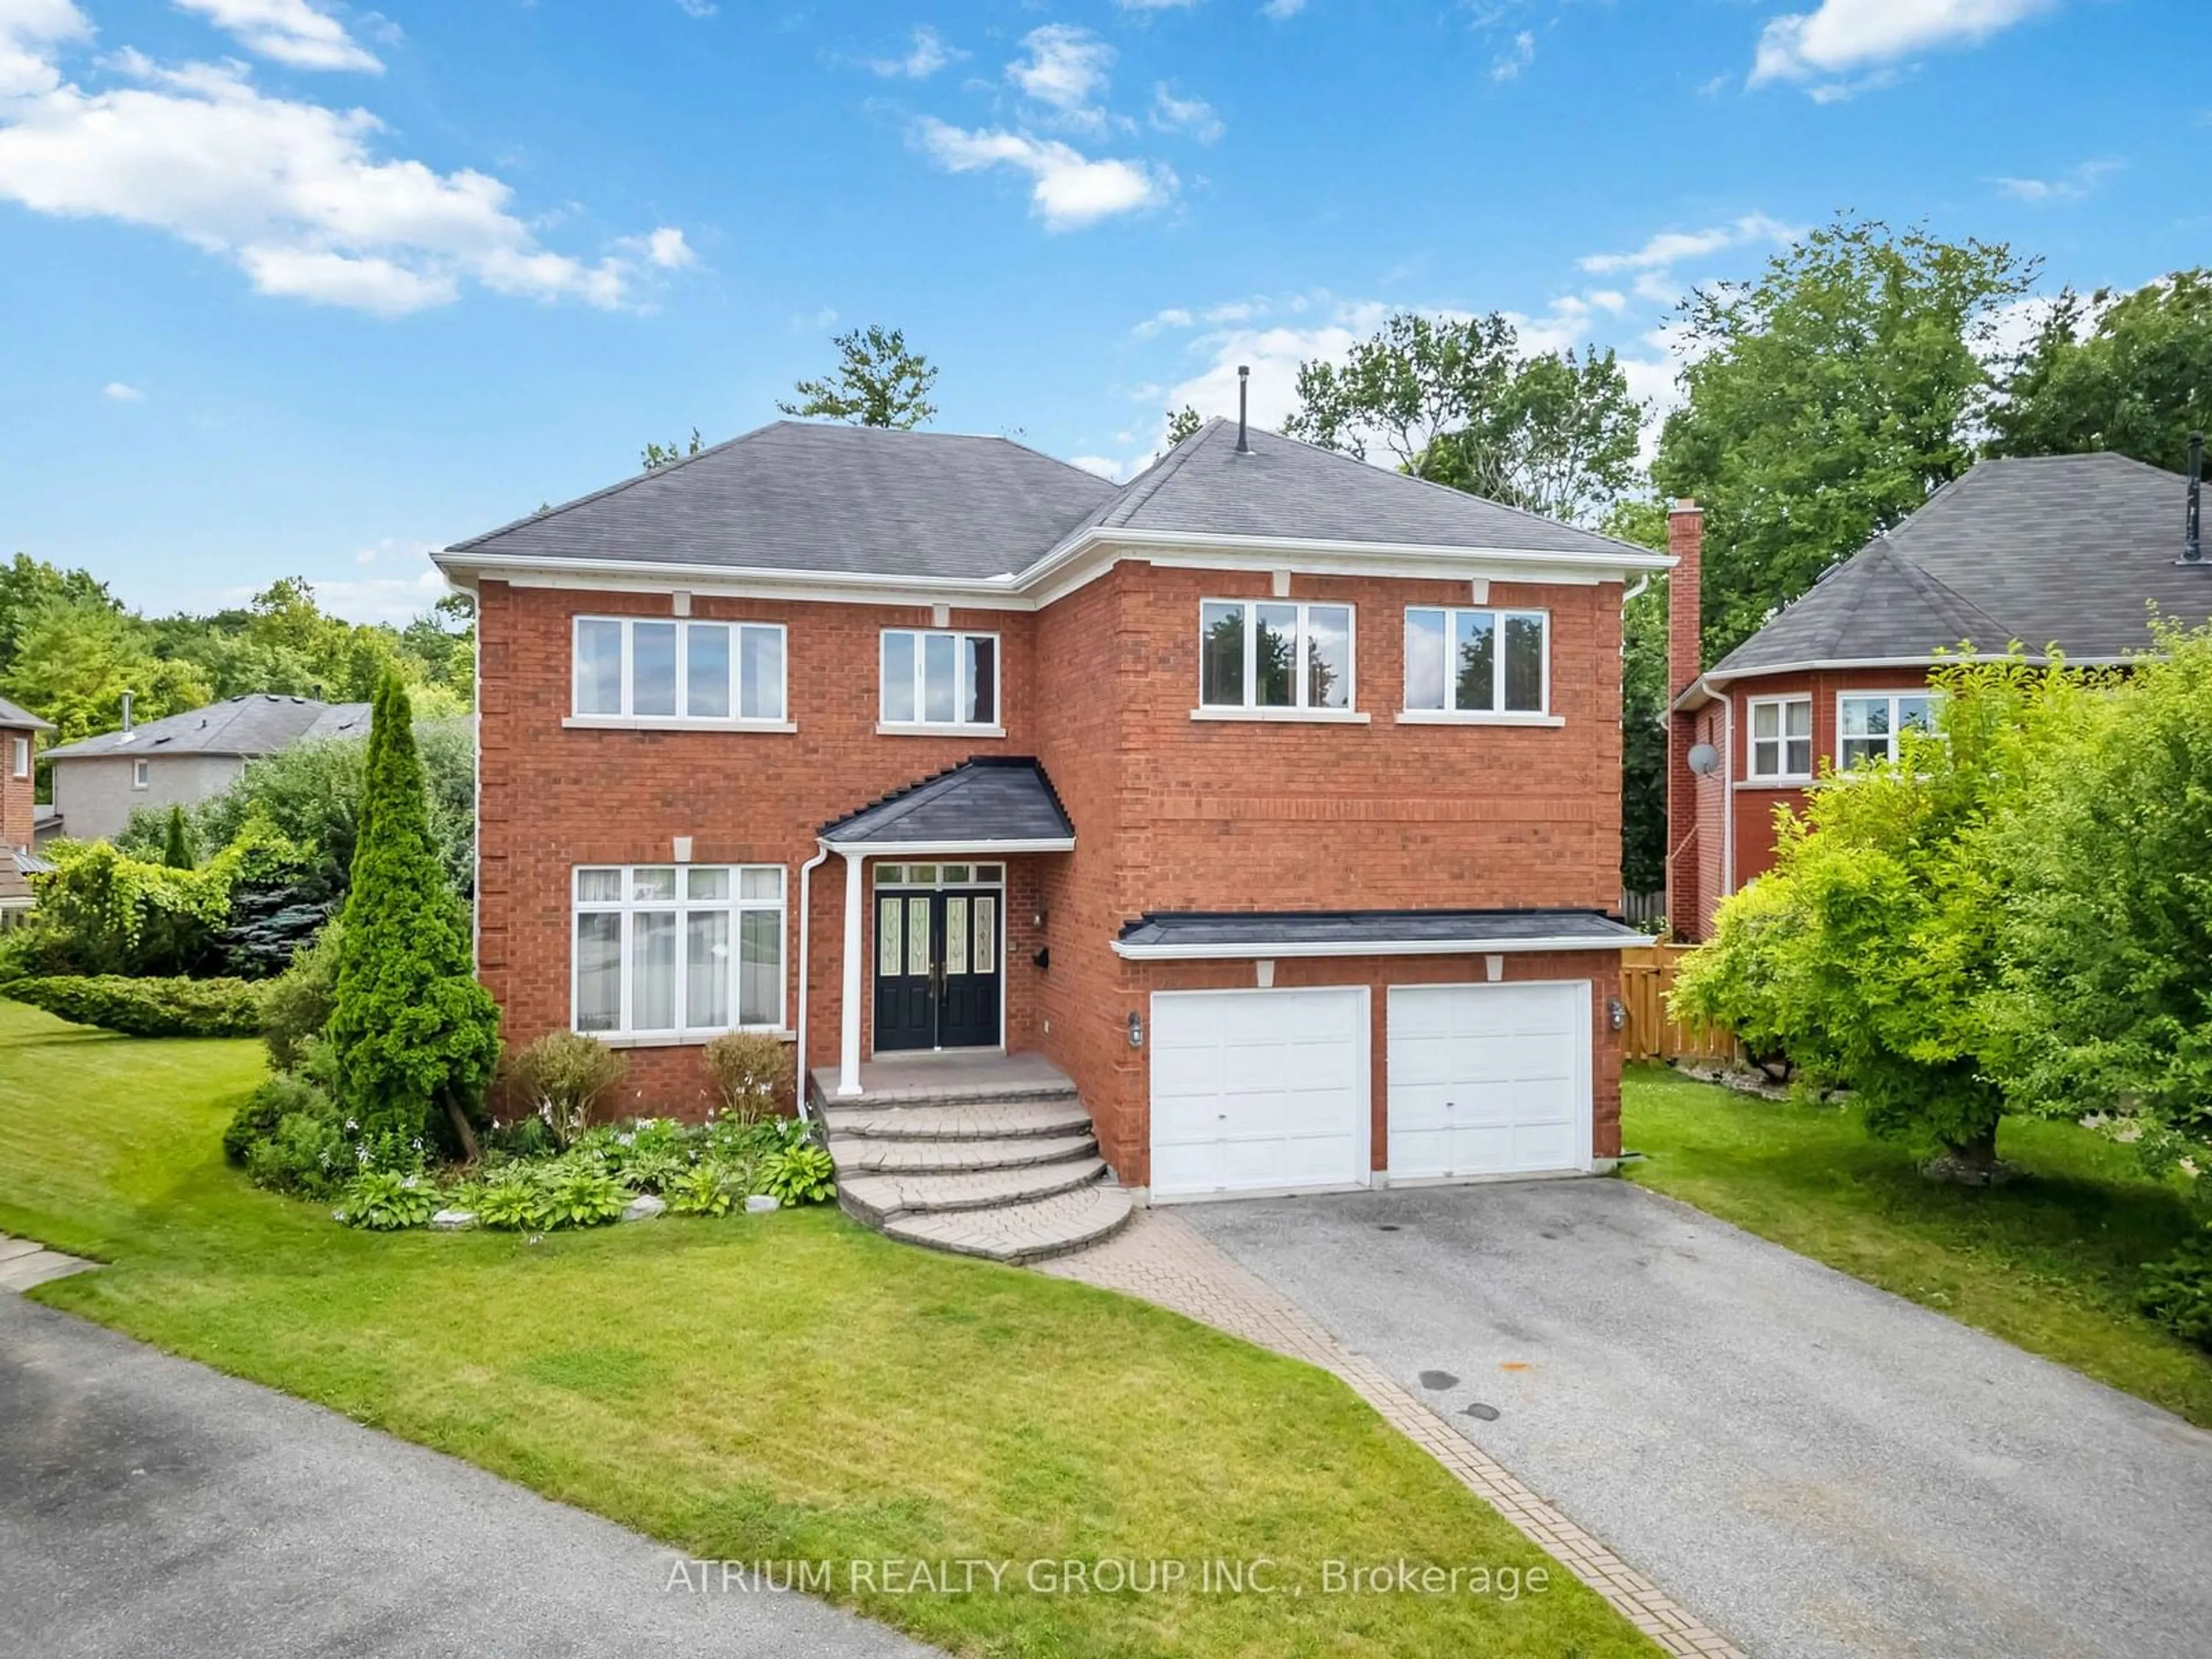 Home with brick exterior material for 279 Howell Cres, Pickering Ontario L1V 6C1